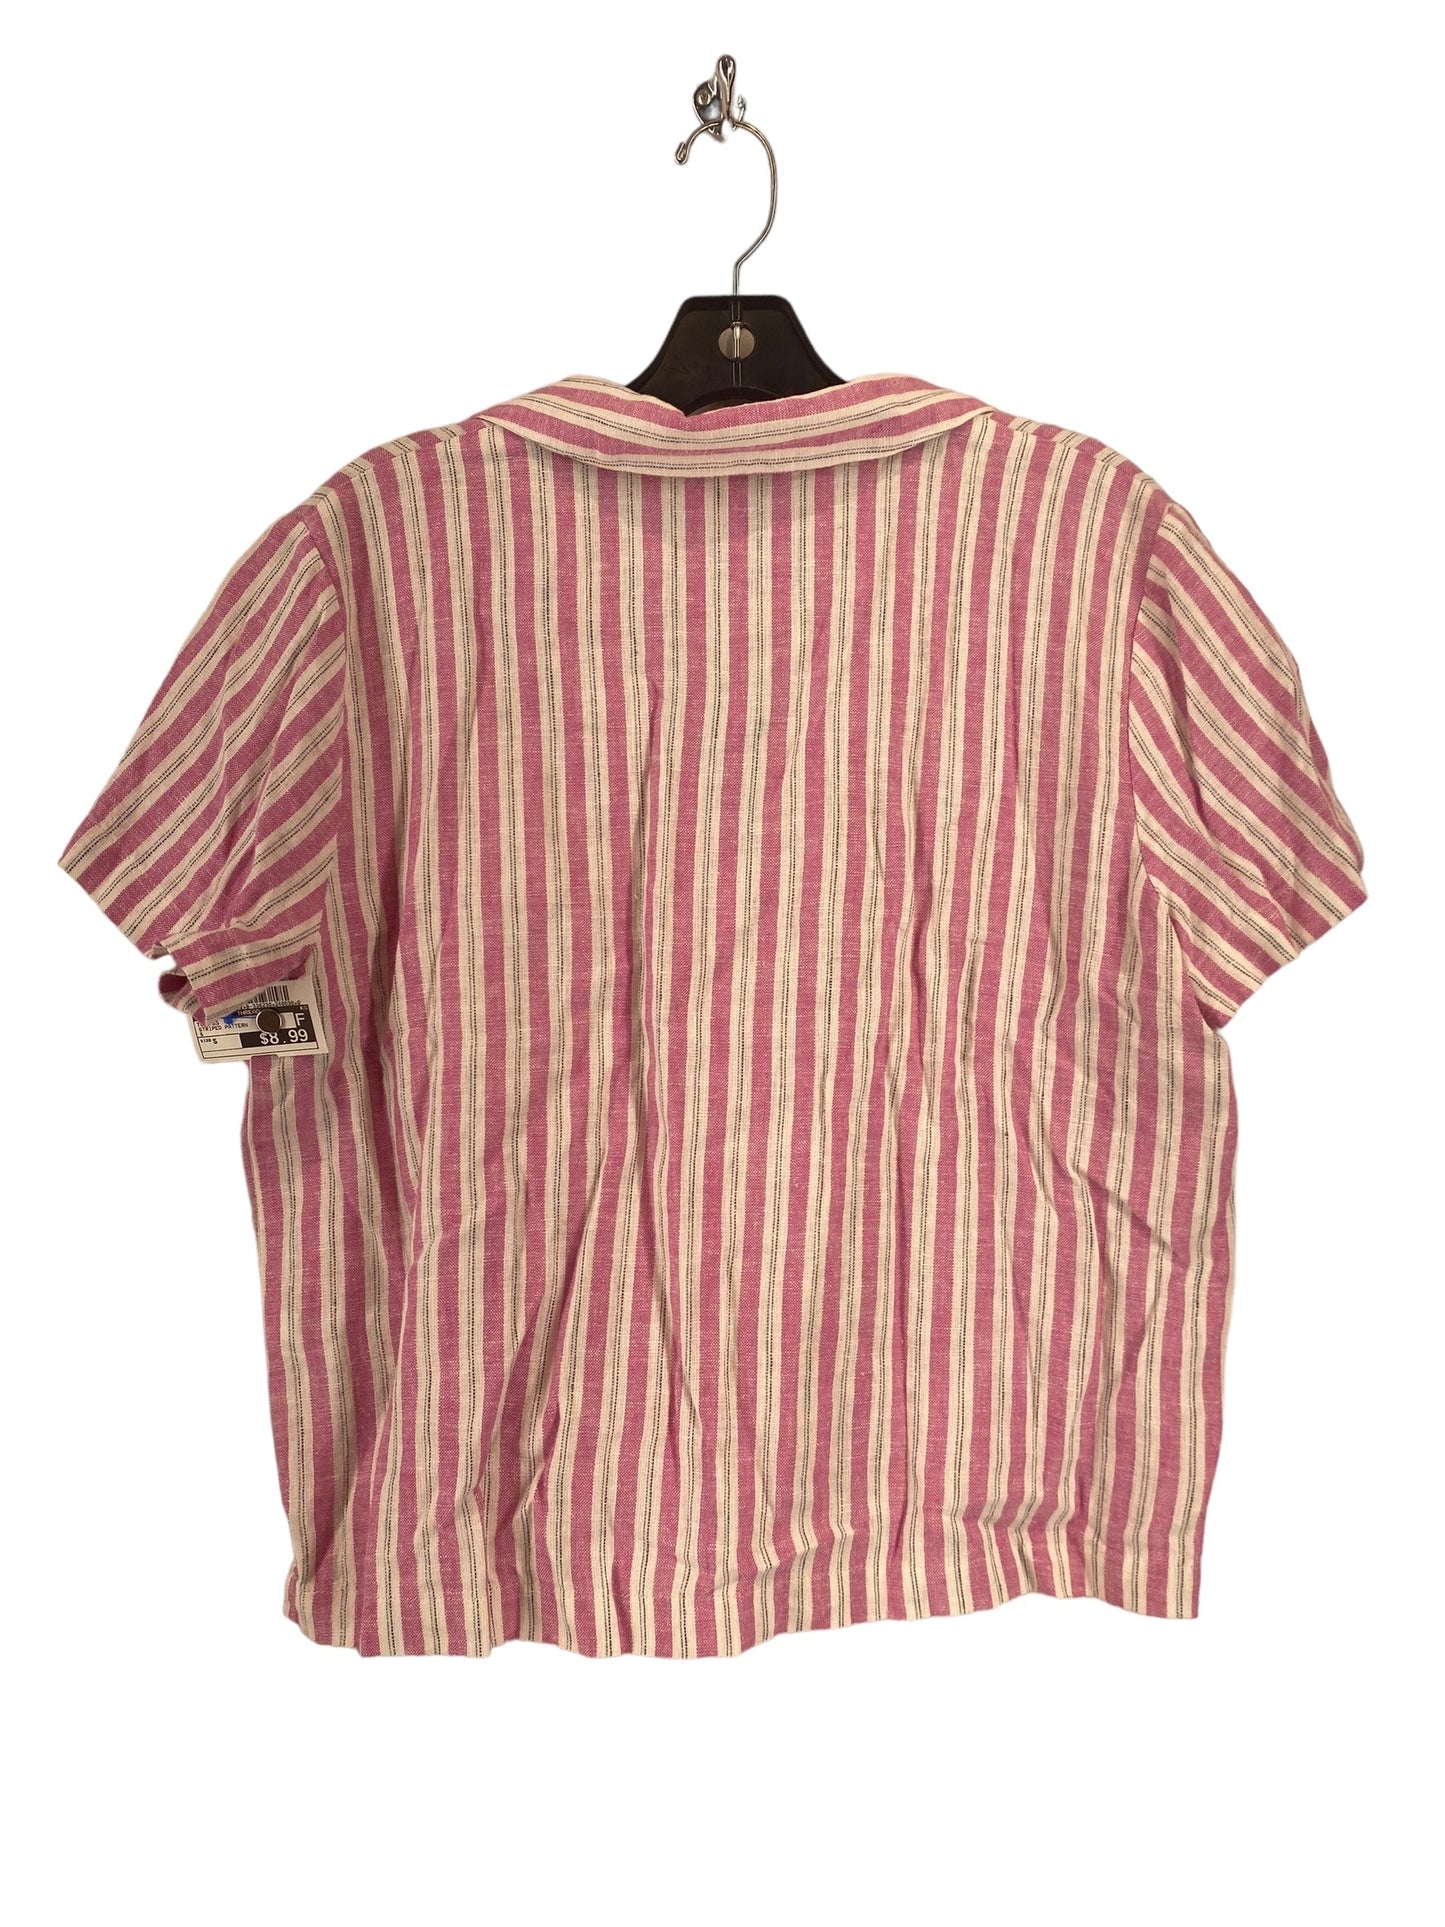 Striped Pattern Top Short Sleeve Universal Thread, Size S